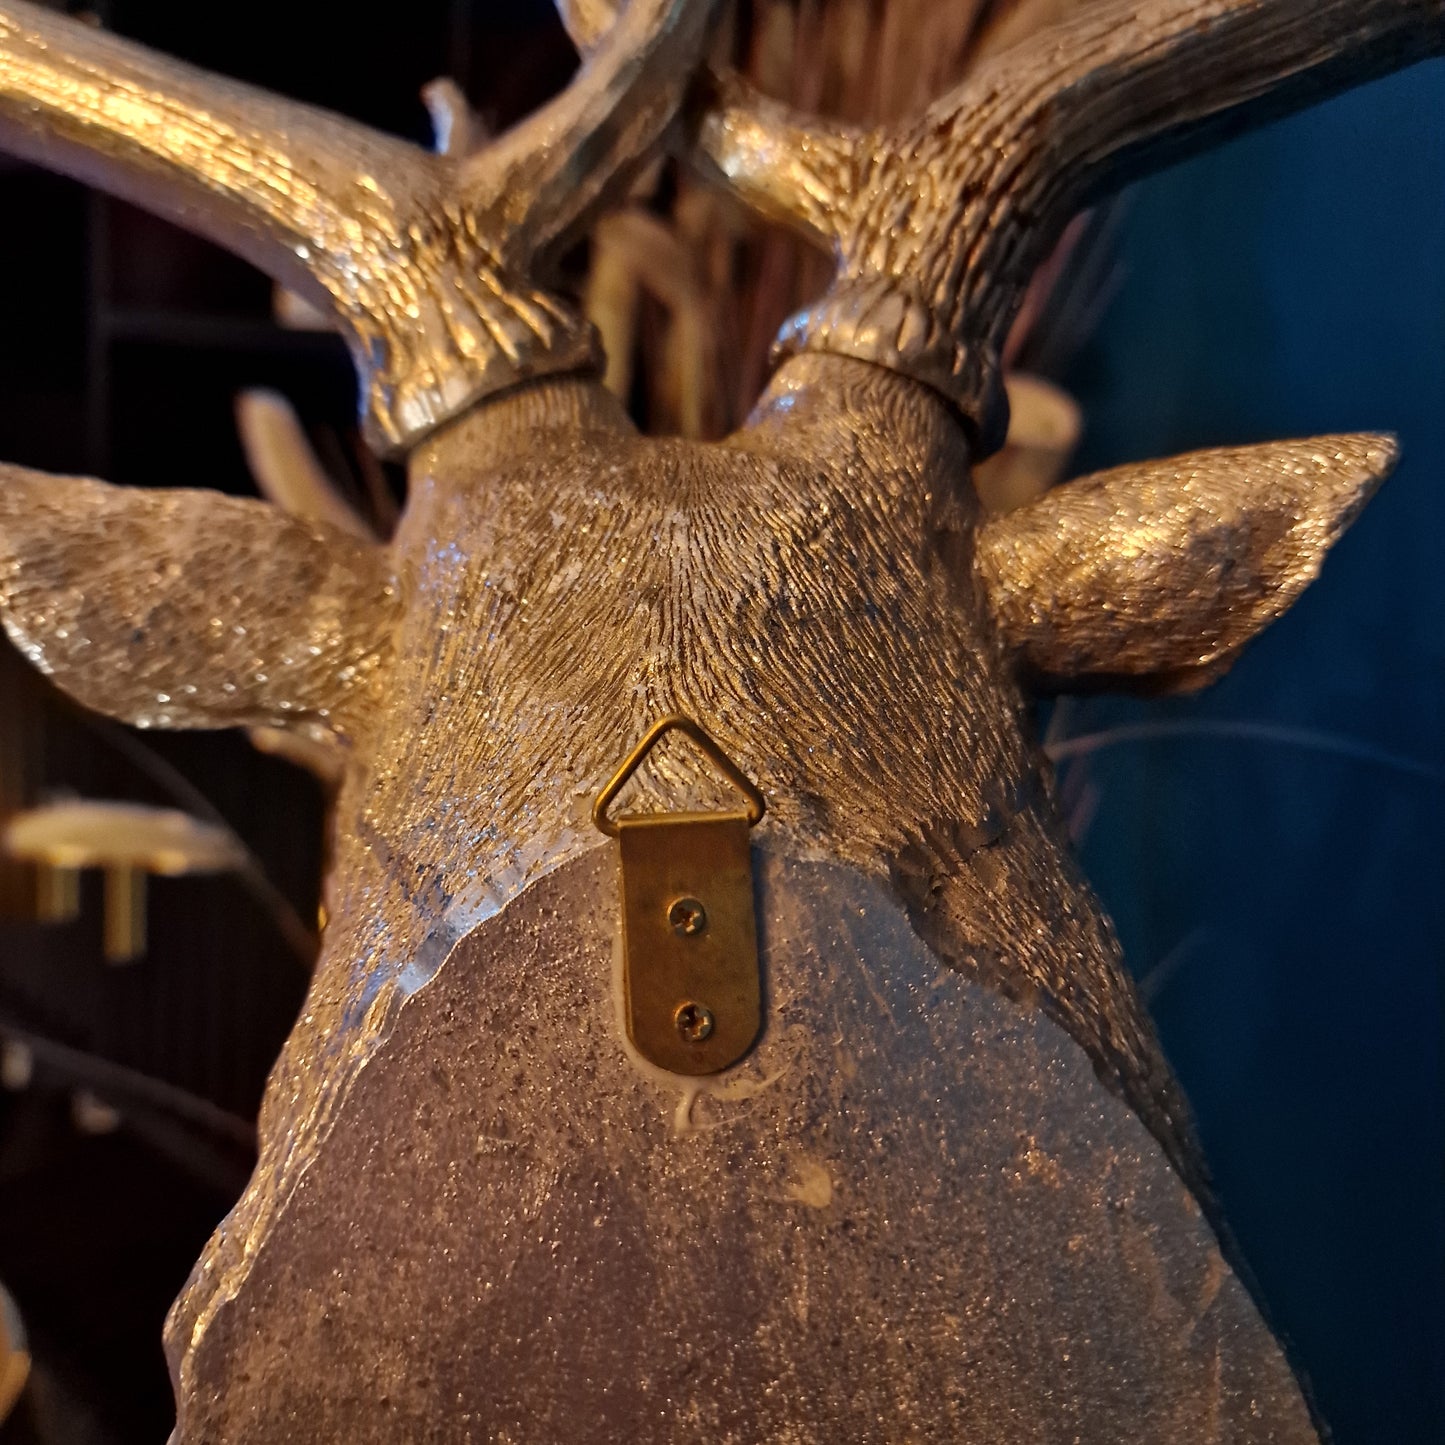 Wall mounted Stag head